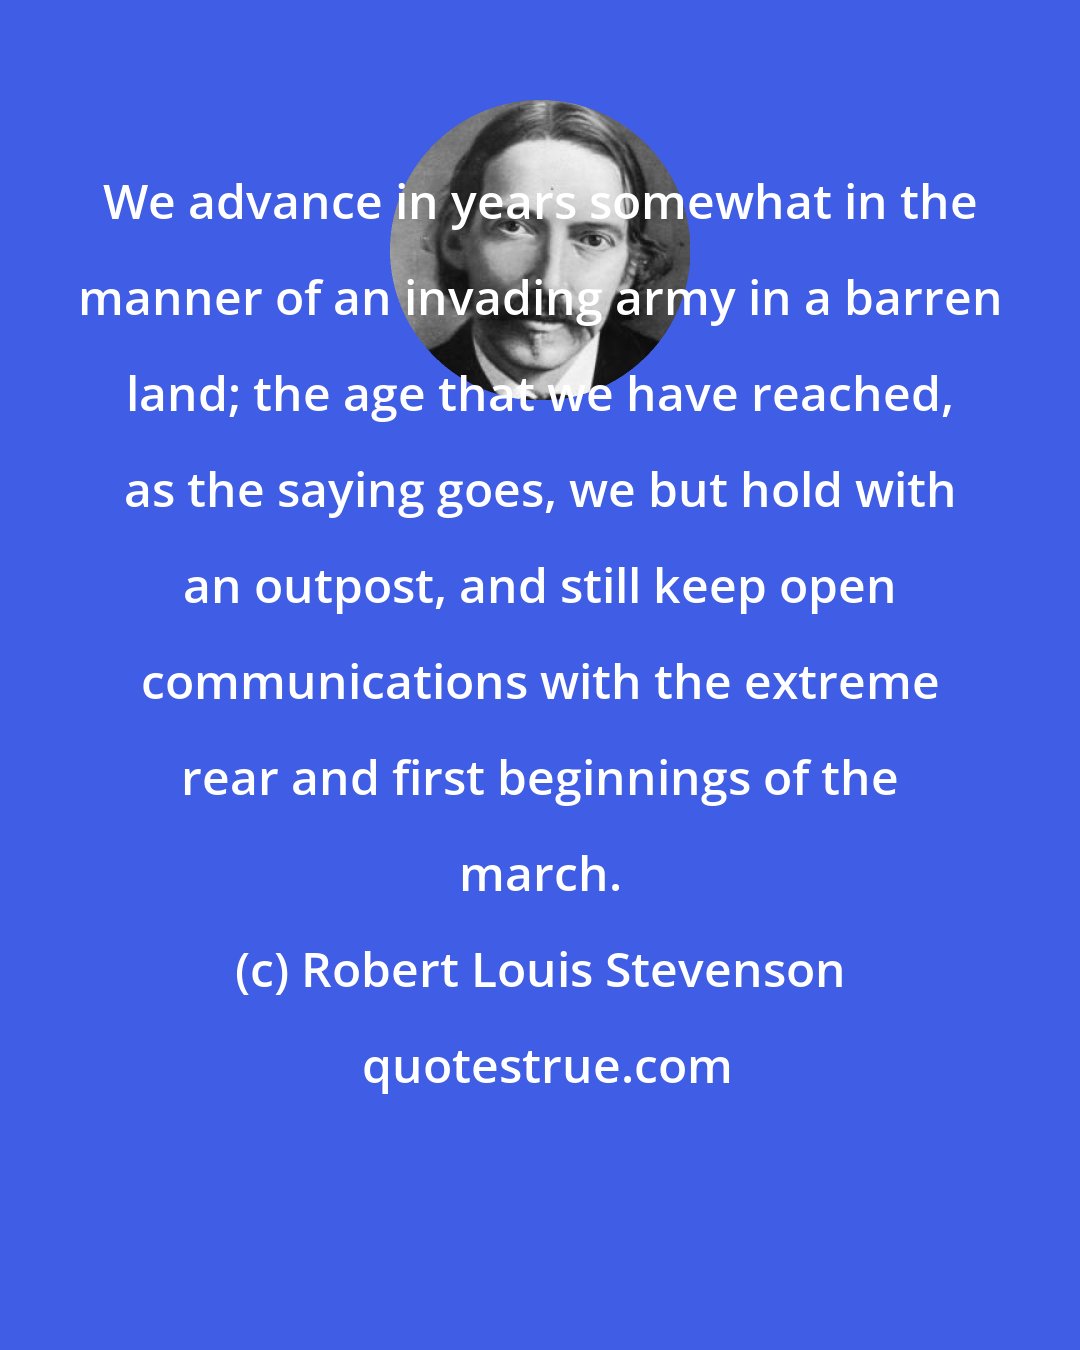 Robert Louis Stevenson: We advance in years somewhat in the manner of an invading army in a barren land; the age that we have reached, as the saying goes, we but hold with an outpost, and still keep open communications with the extreme rear and first beginnings of the march.